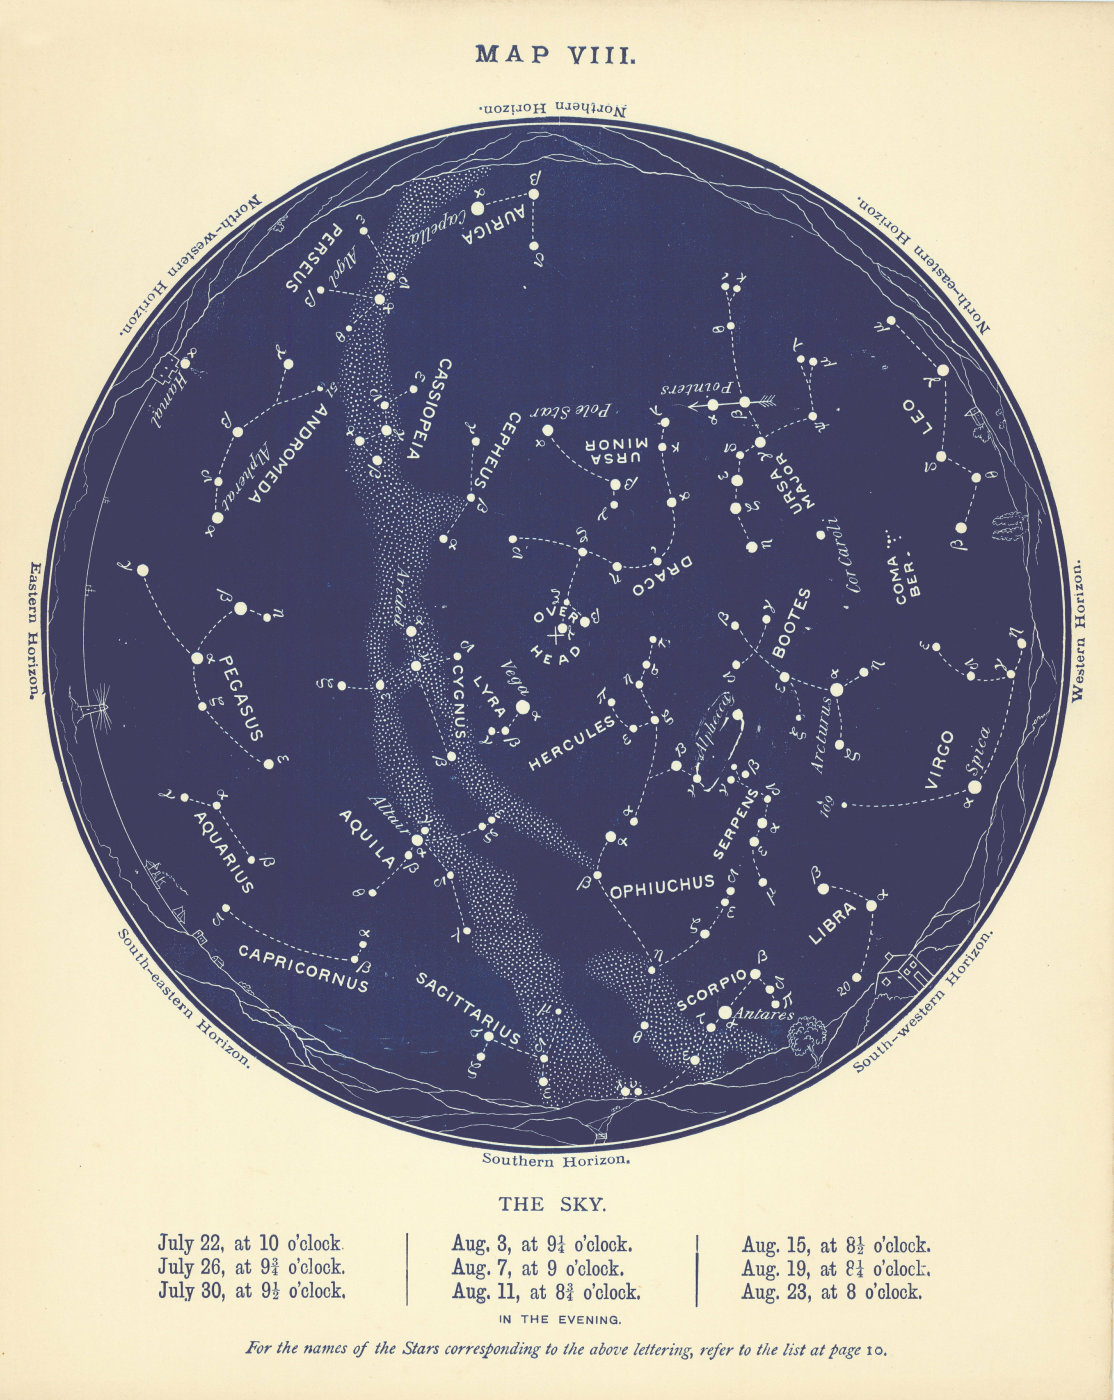 Associate Product STAR MAP VIII. The Night Sky. July-August. Astronomy. PROCTOR 1896 old